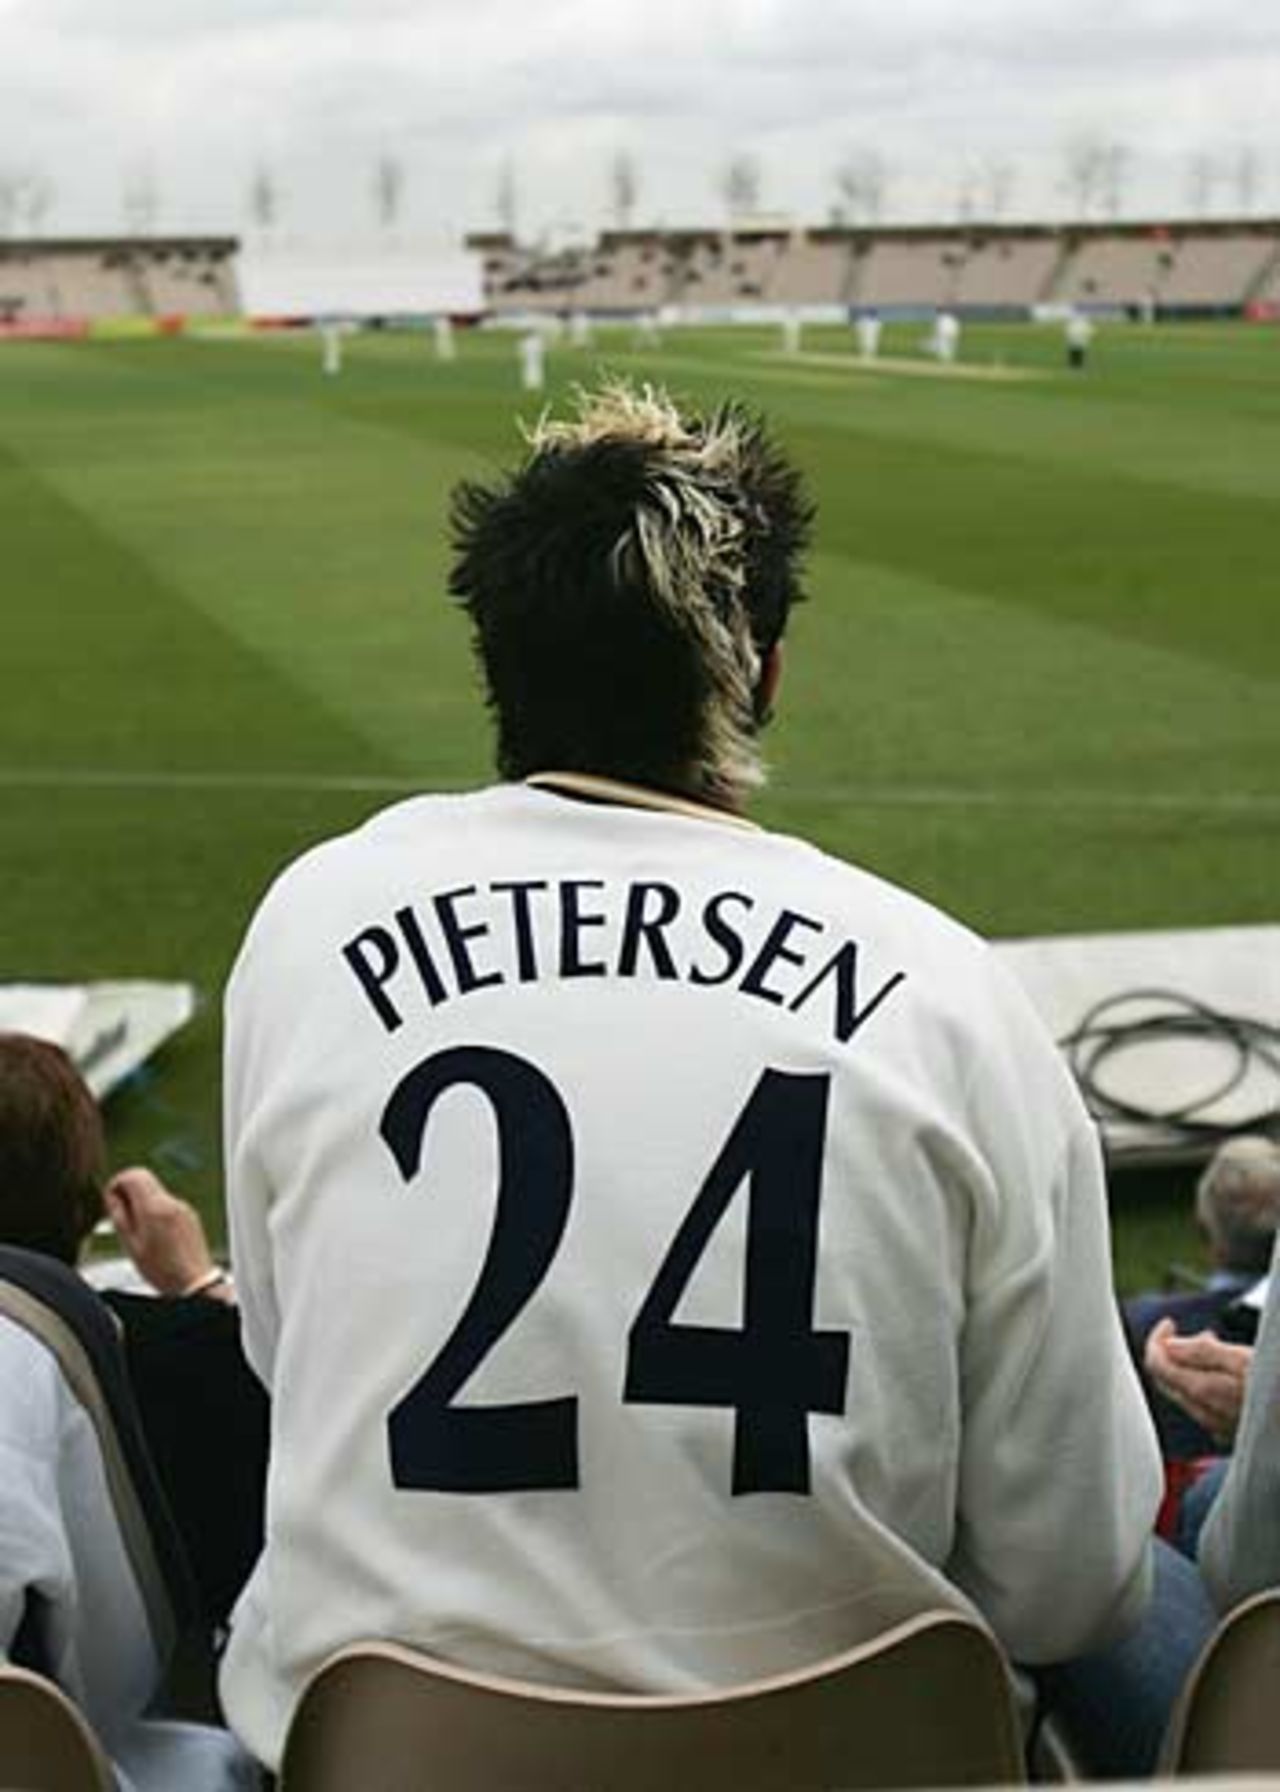 Kevin Pietersen watches Hampshire from the stands, Hampshire v Gloucestershire, Southampton, April 13, 2005